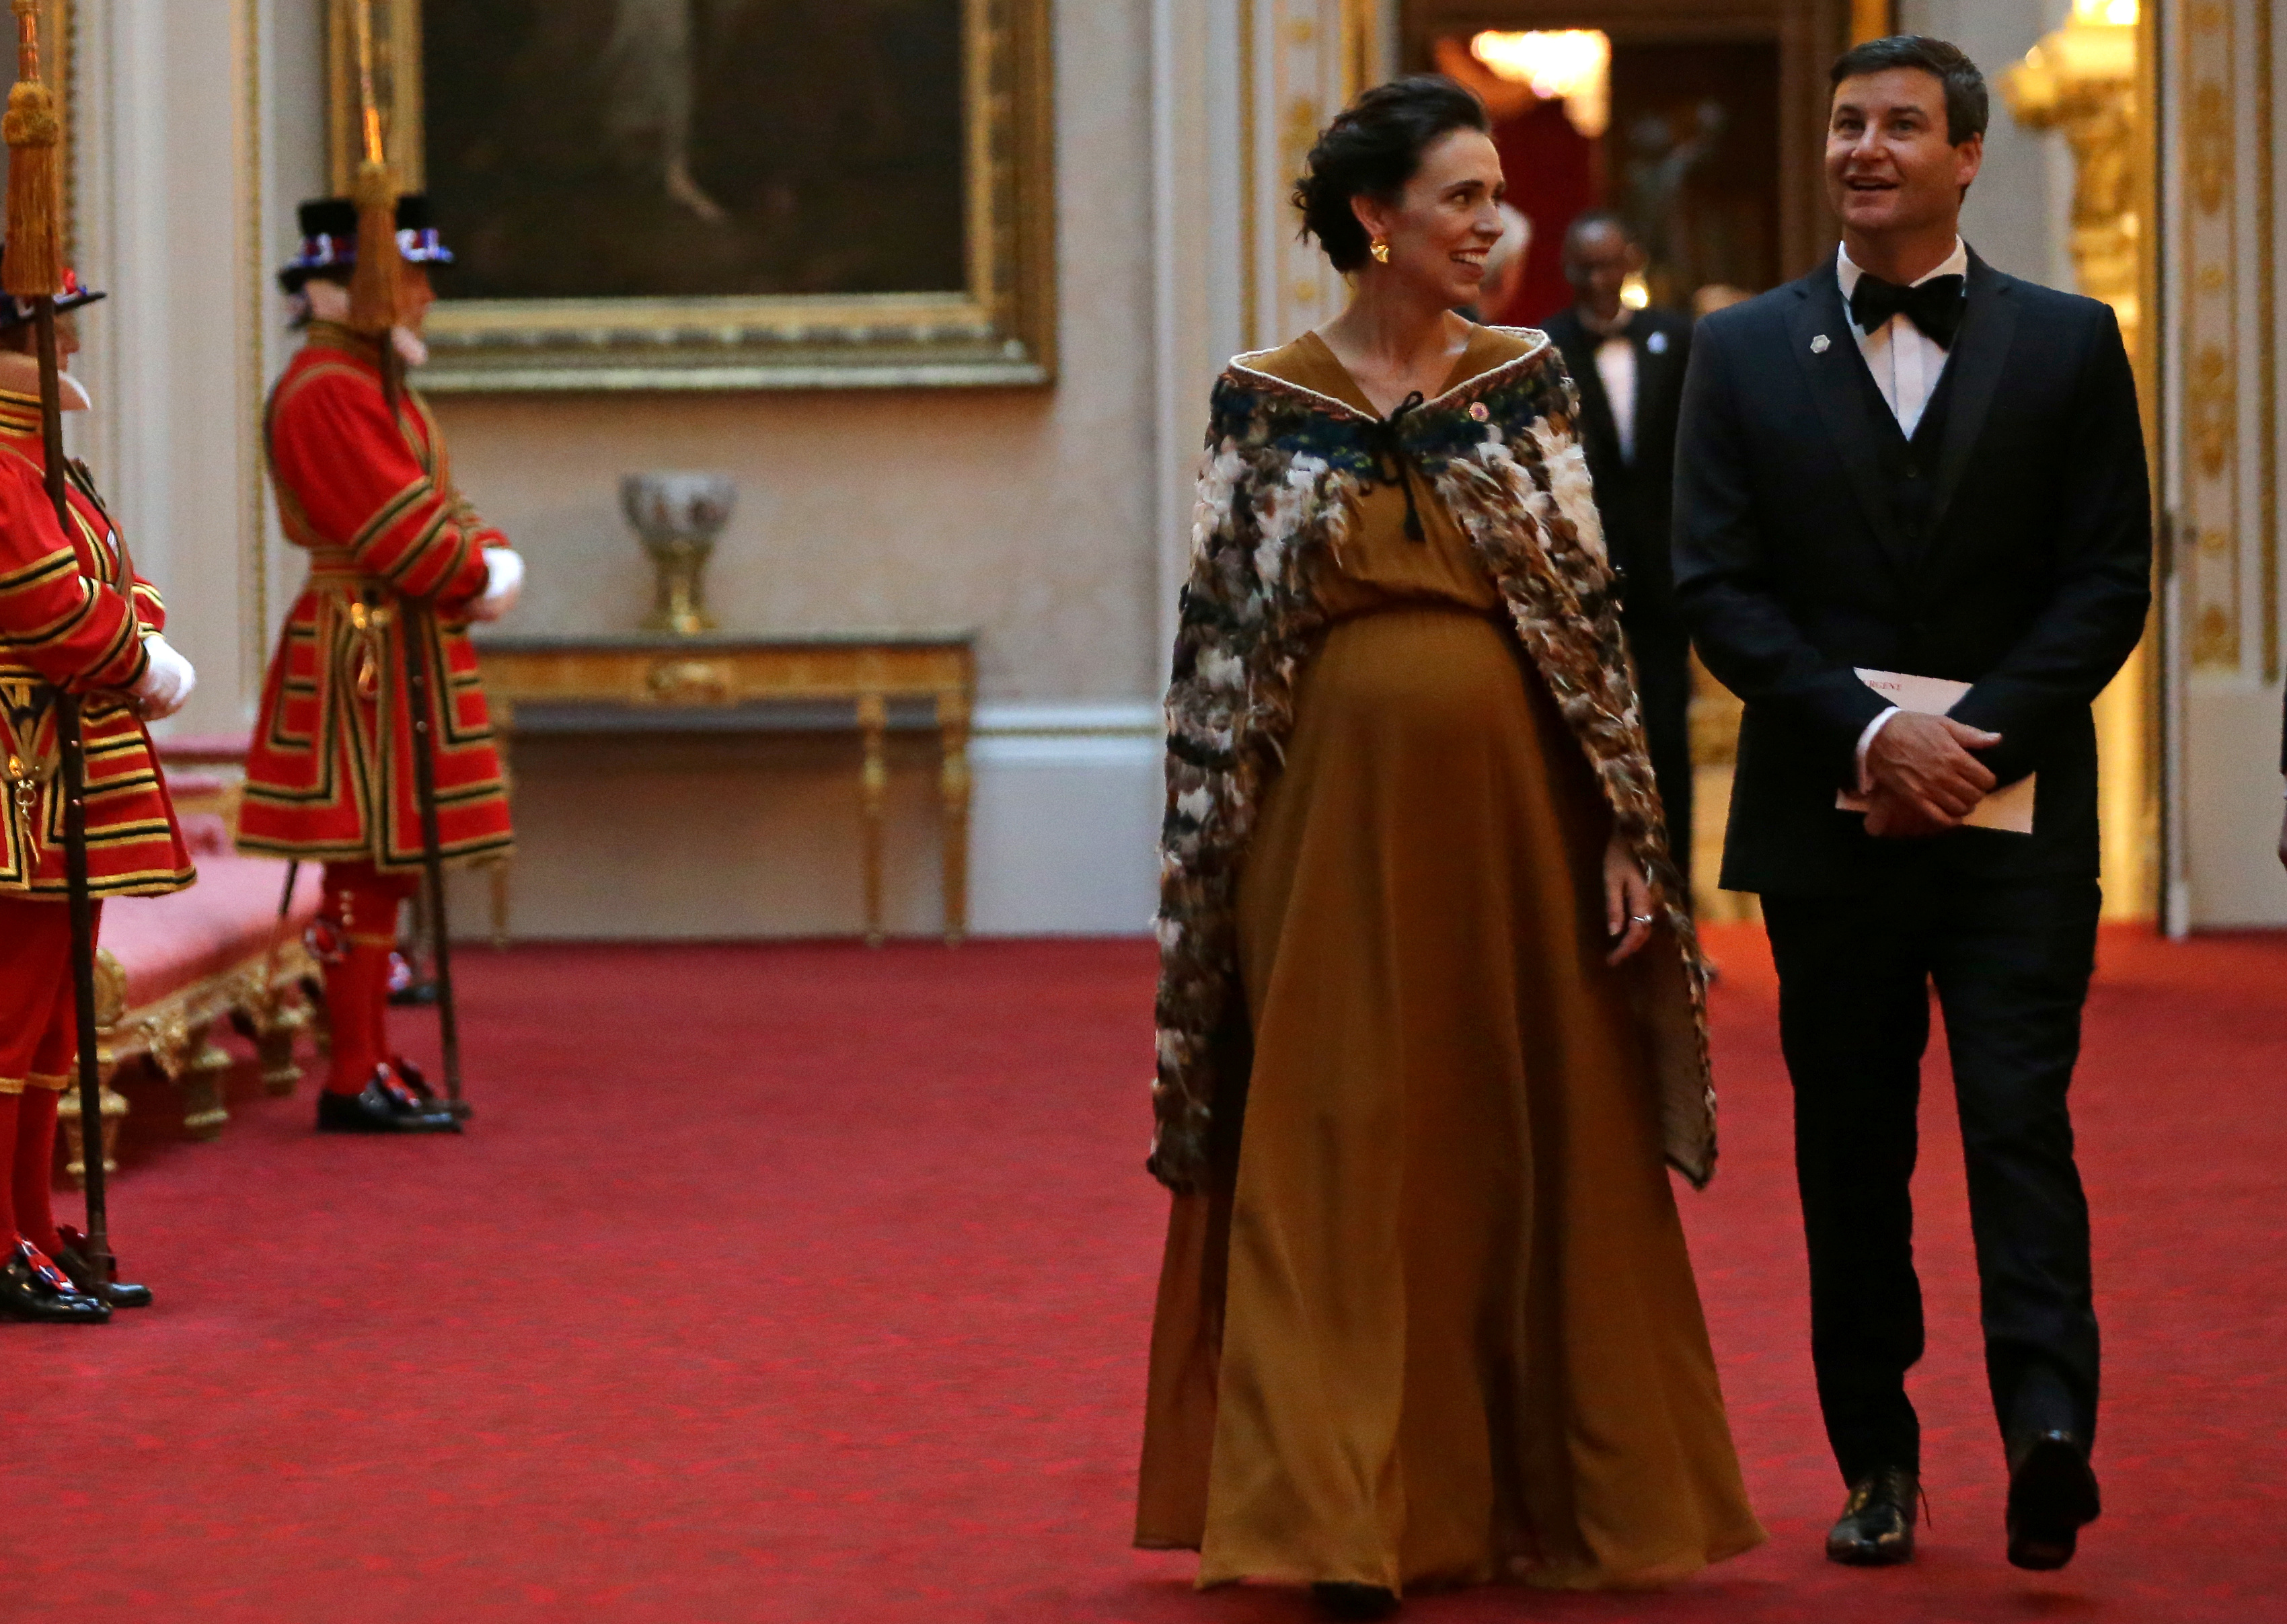 New Zealand's Prime Minister Jacinda Ardern arrives to attend The Queen's Dinner during The Commonwealth Heads of Government Meeting (CHOGM), at Buckingham Palace in London  on April 19, 2018.  Daniel Leal-Olivas/Pool via Reuters - RC15D51BEB50